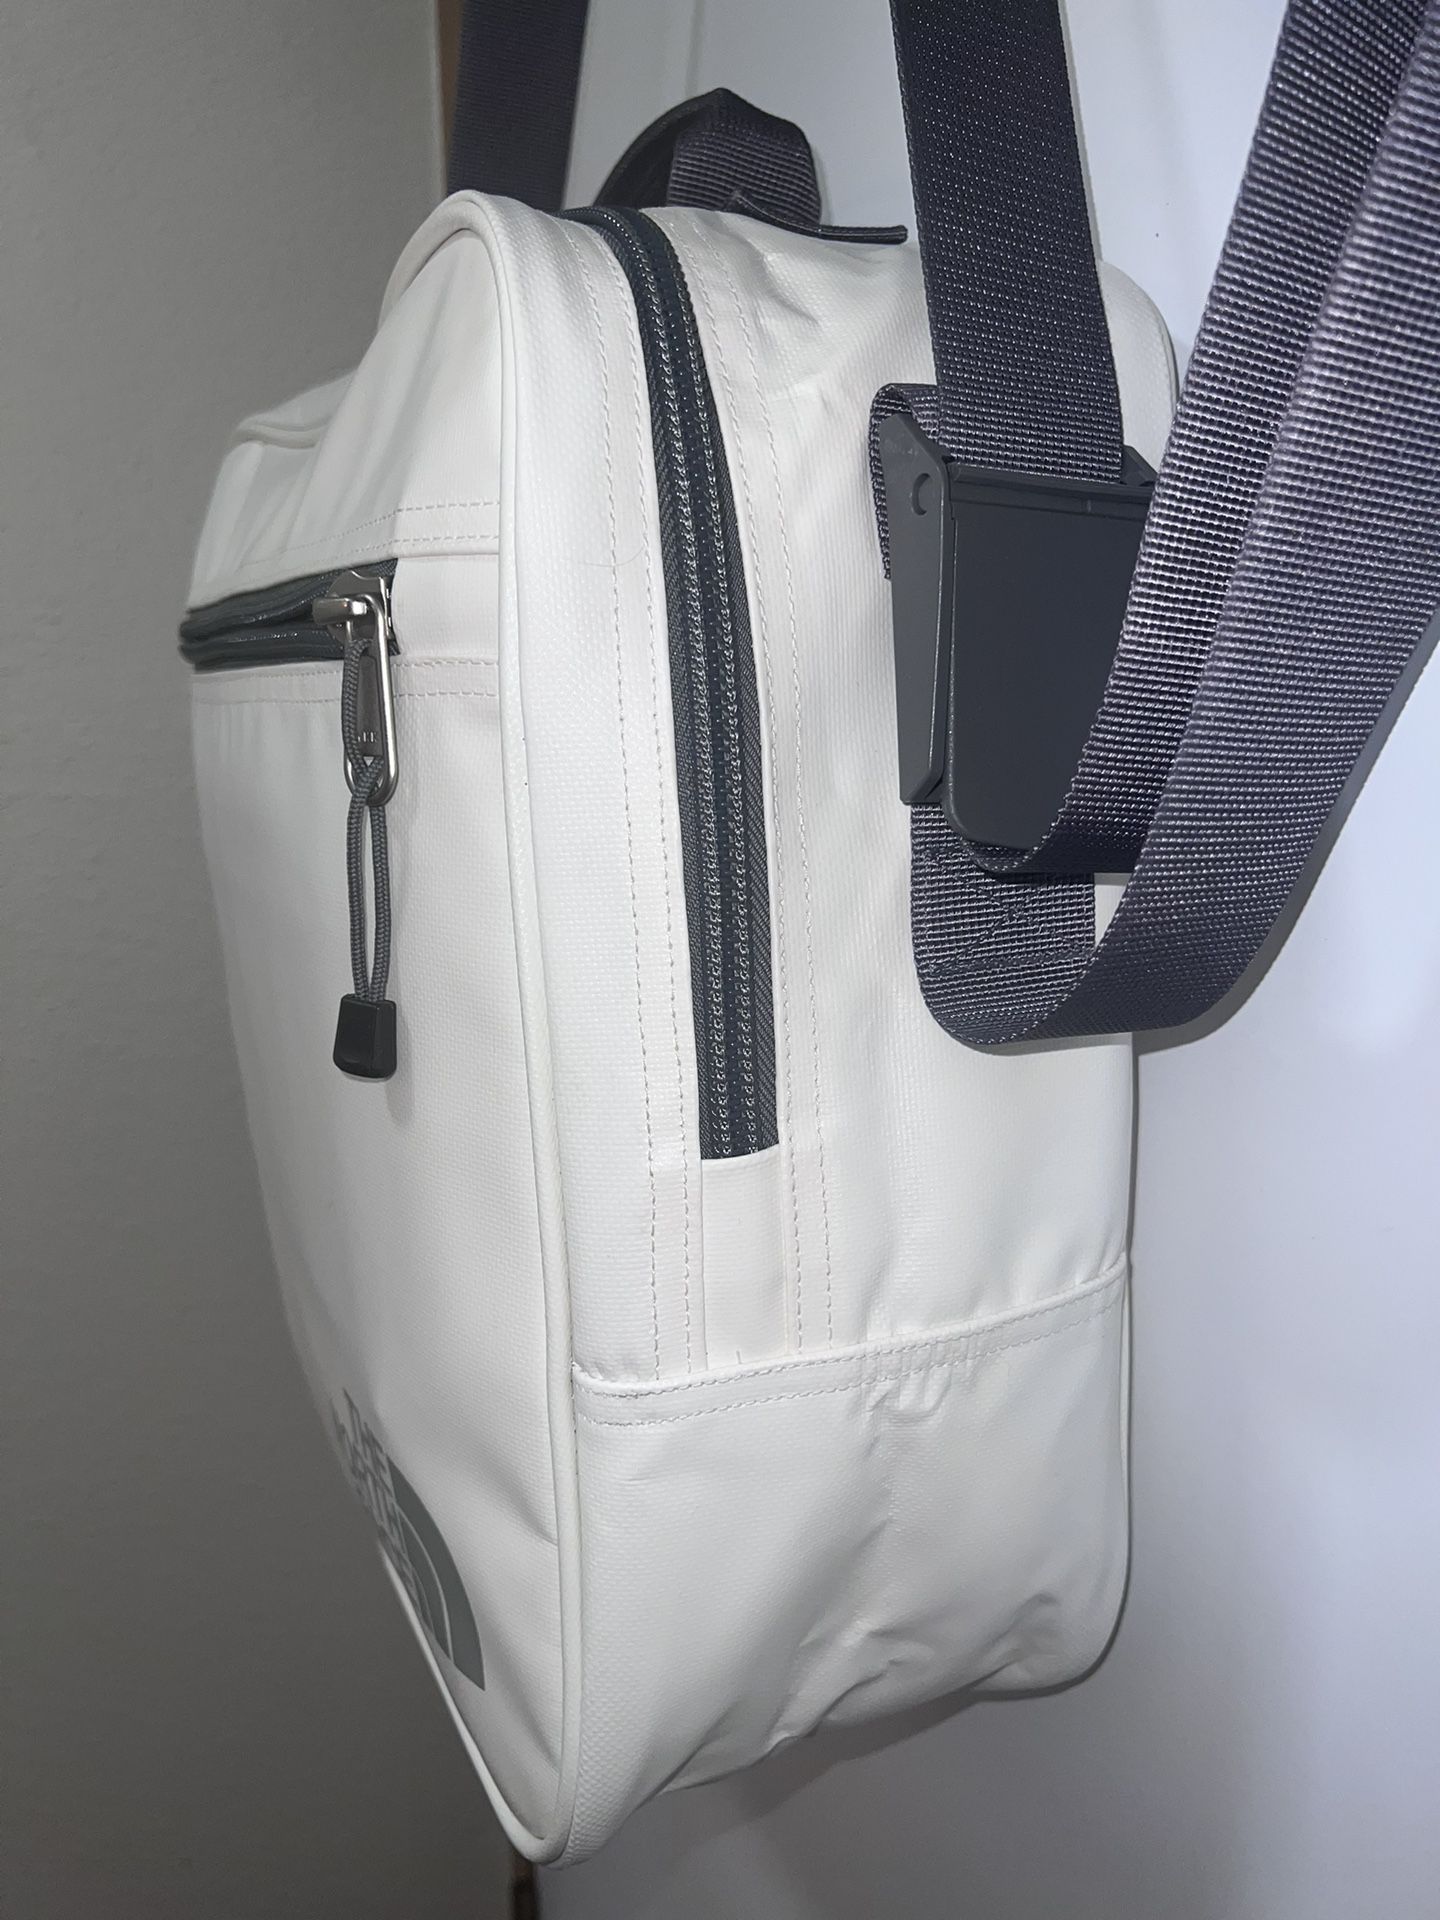 North Face College Computer Notebook Bag